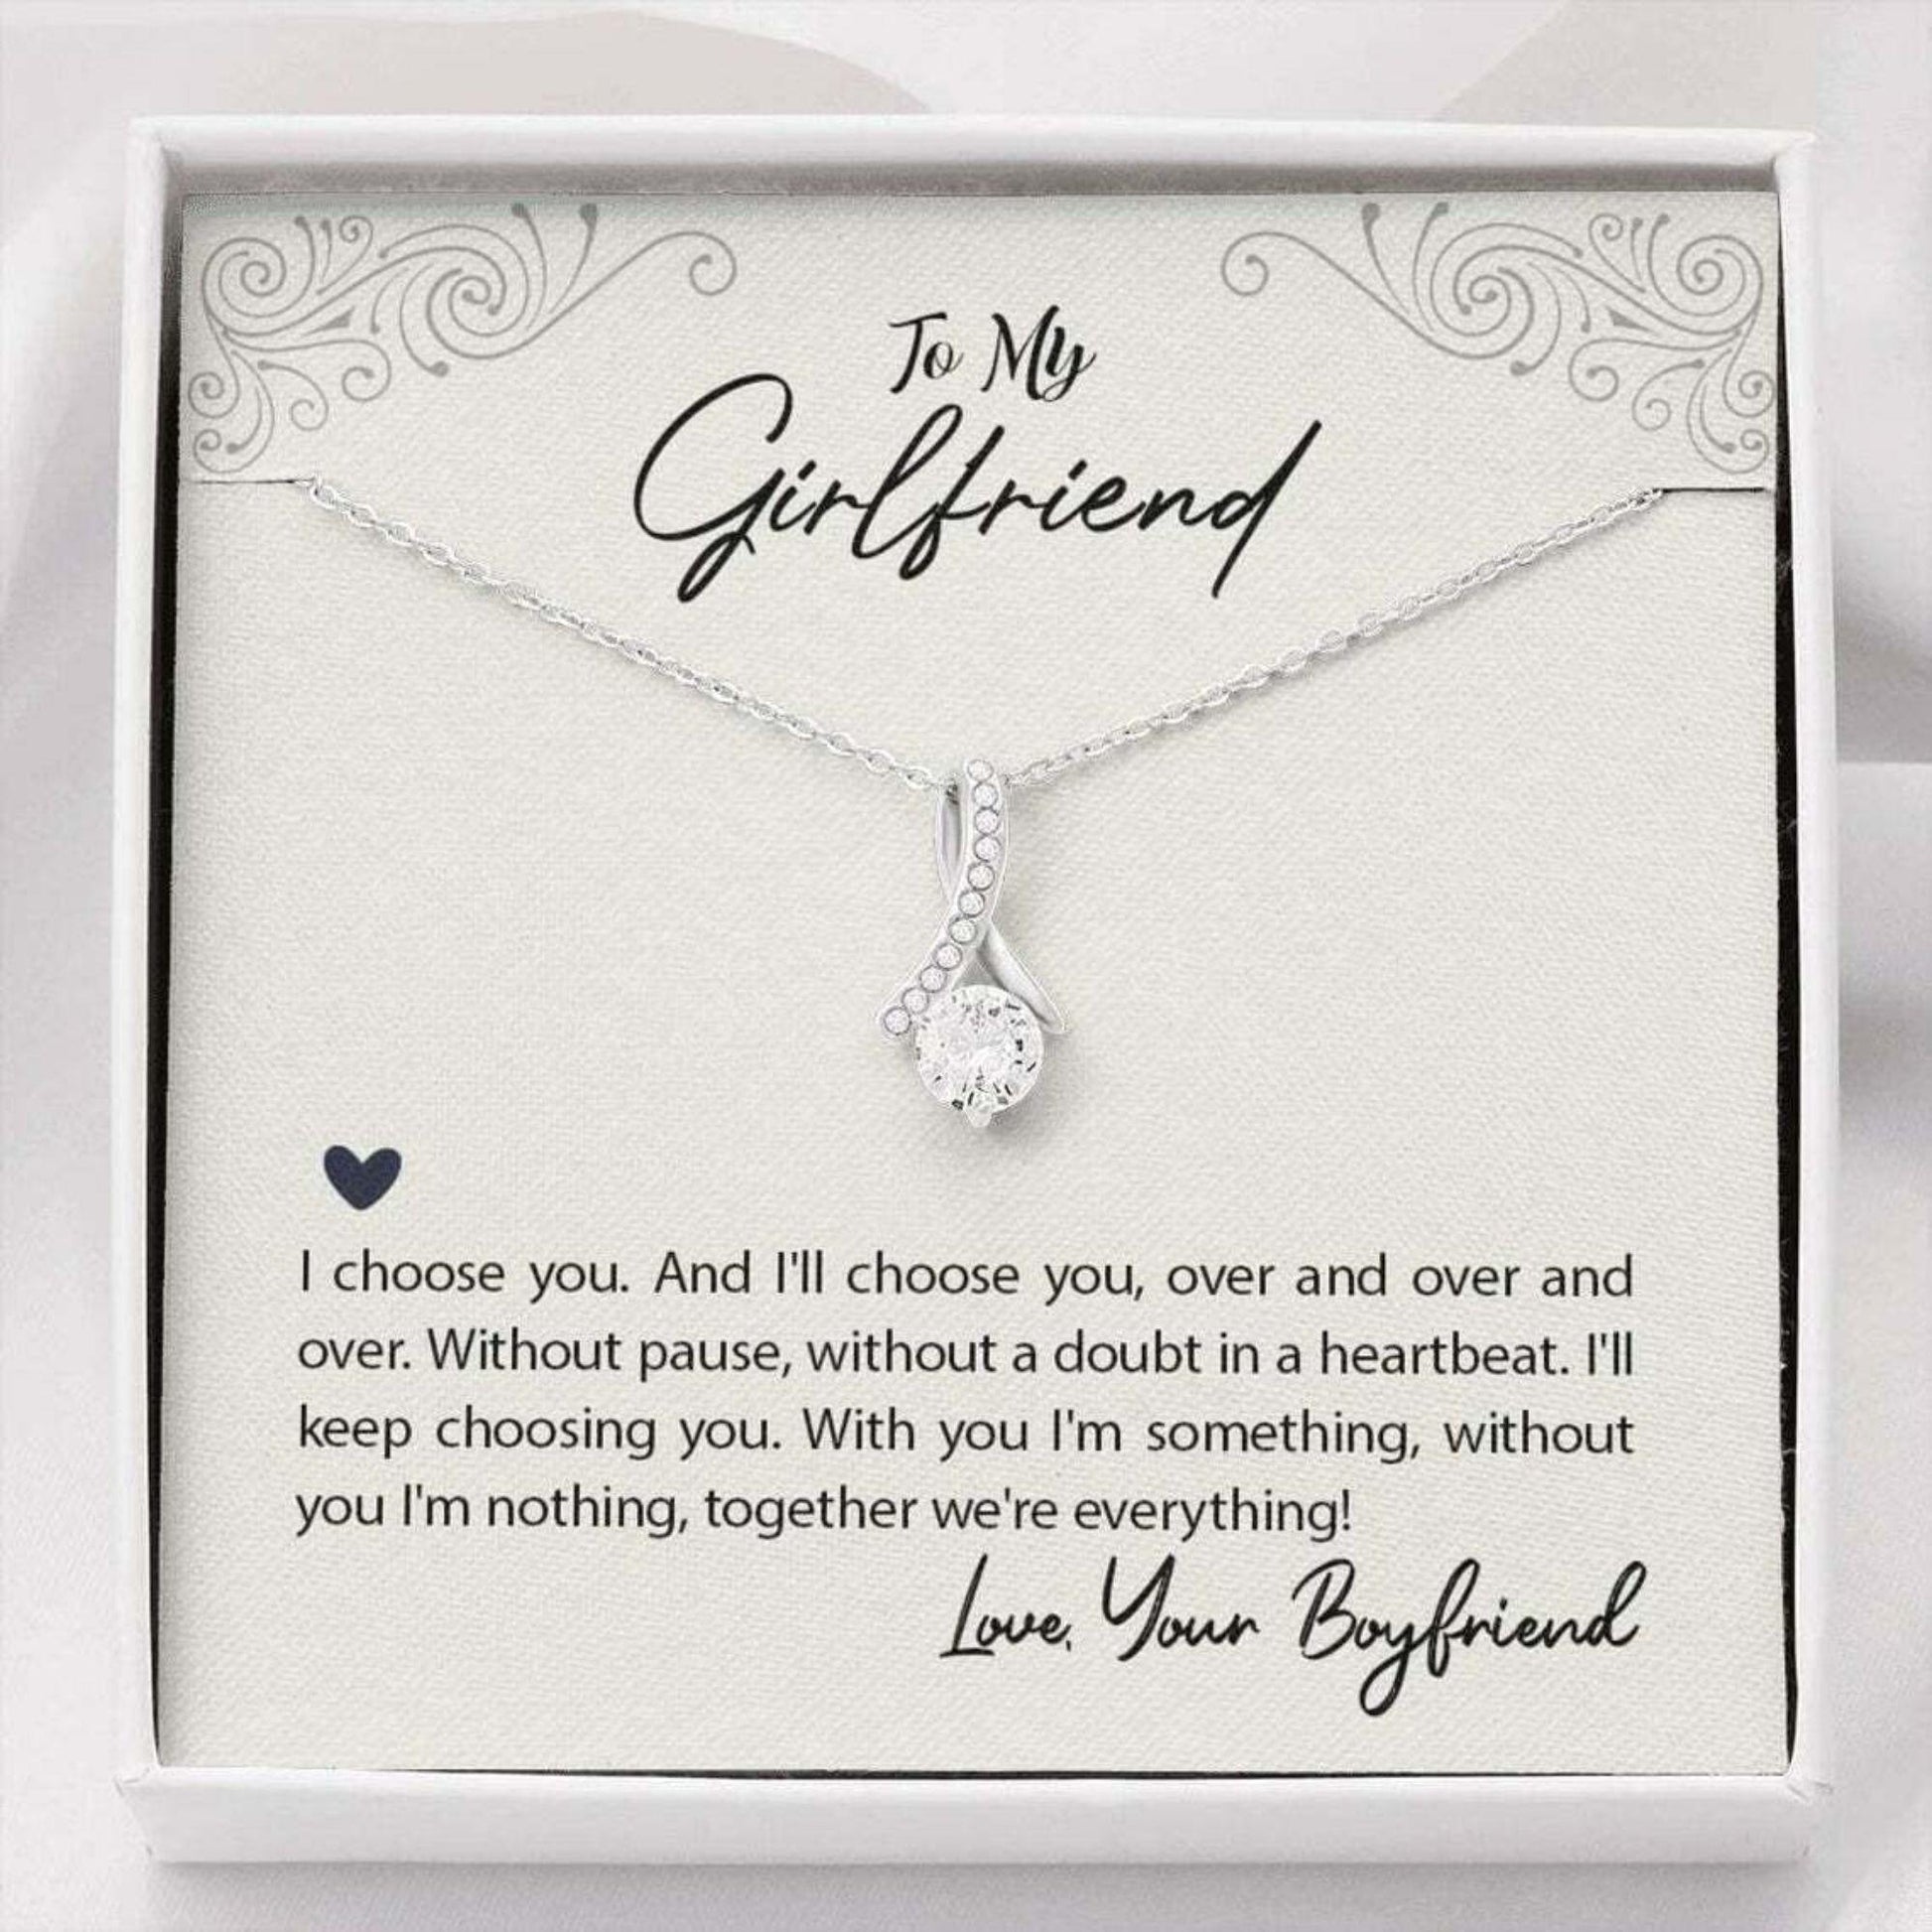 Girlfriend Necklace, Necklace With Message Card & Box To My Girlfriend - I Choose You - Valentine's Day Necklace